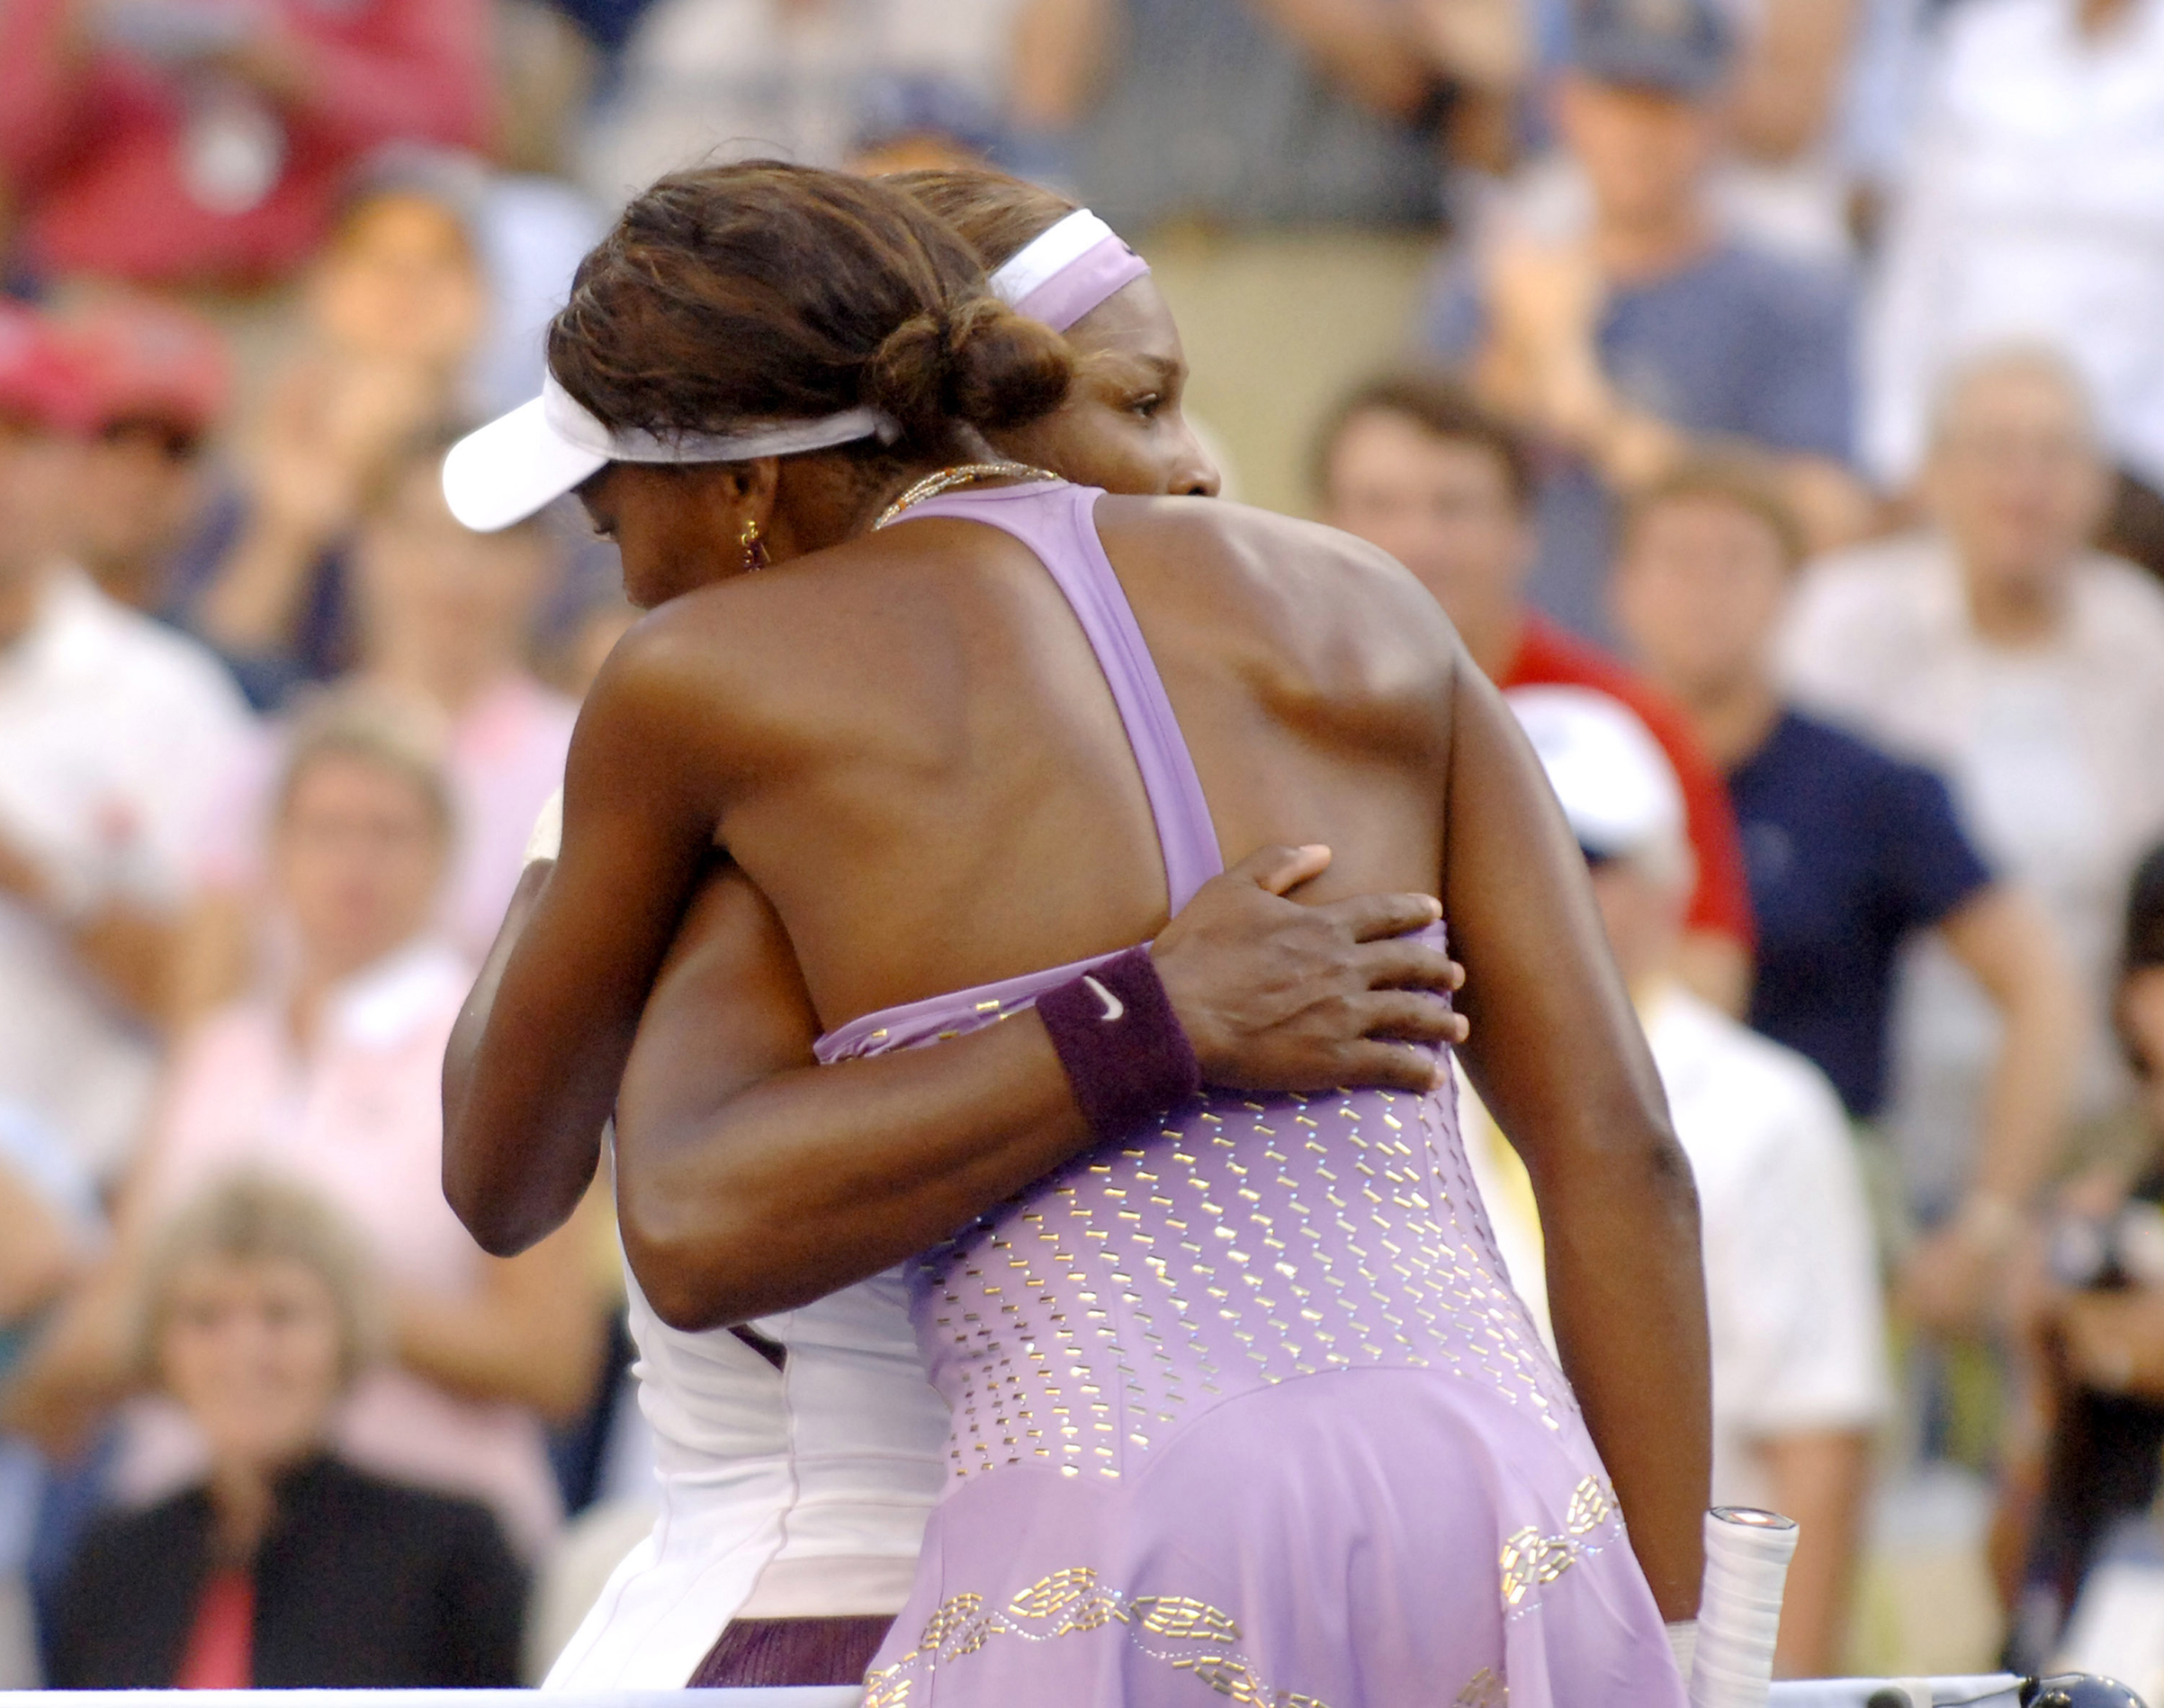 Serena Williams hugs her sister, Venus, after play in a 7-6 6-2 women's quarter final match at the 2005 U. S. Open in Flushing, New York. (Al Messerschmidt—WireImage)